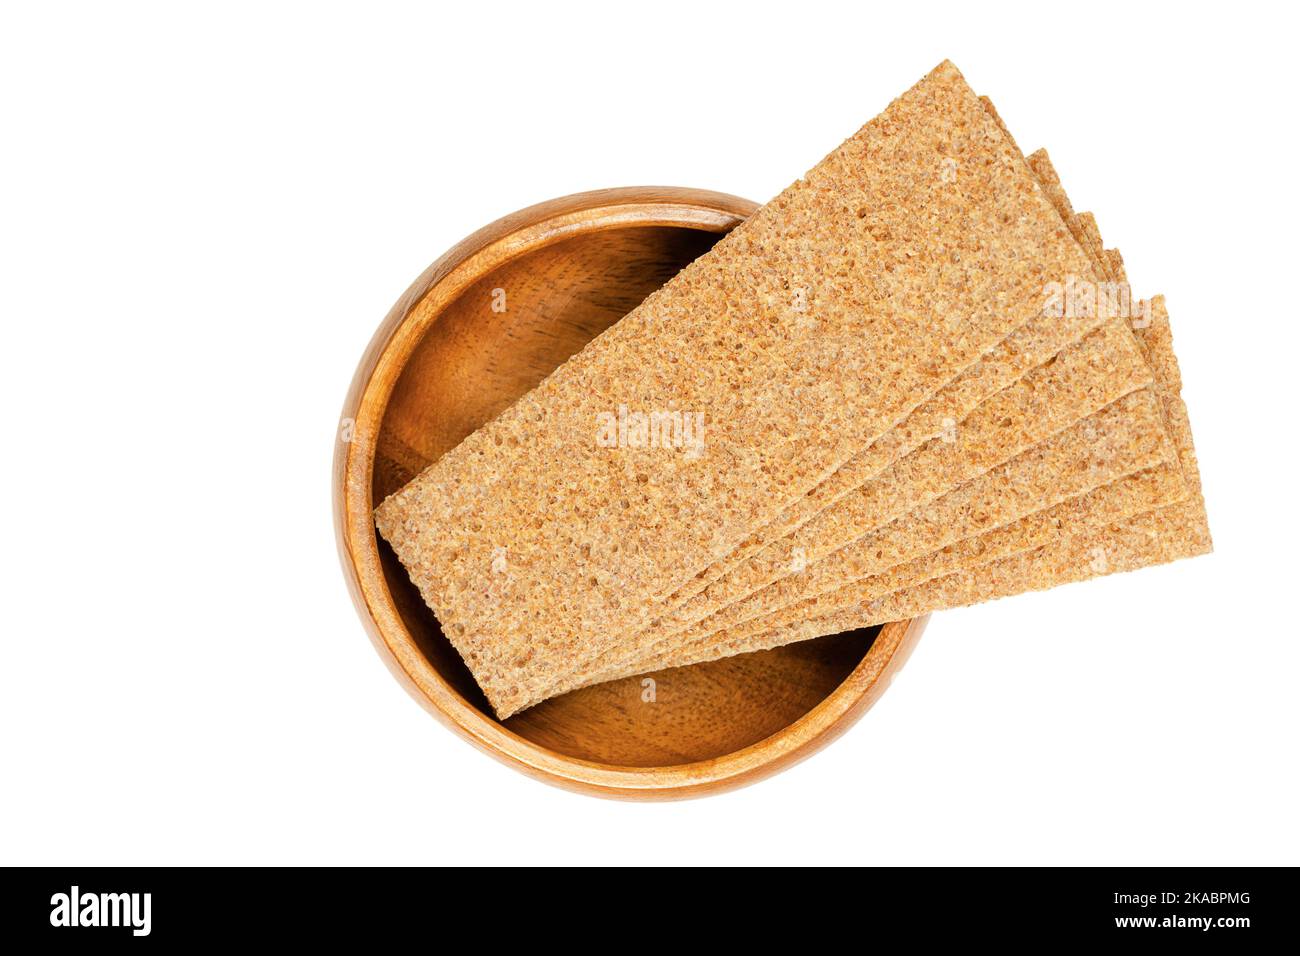 Thin slices of sourdough whole grain rye crispbread, in a wooden bowl. Rectangle shaped, flat and dry, crunchy and crisp cracker and light bread. Stock Photo